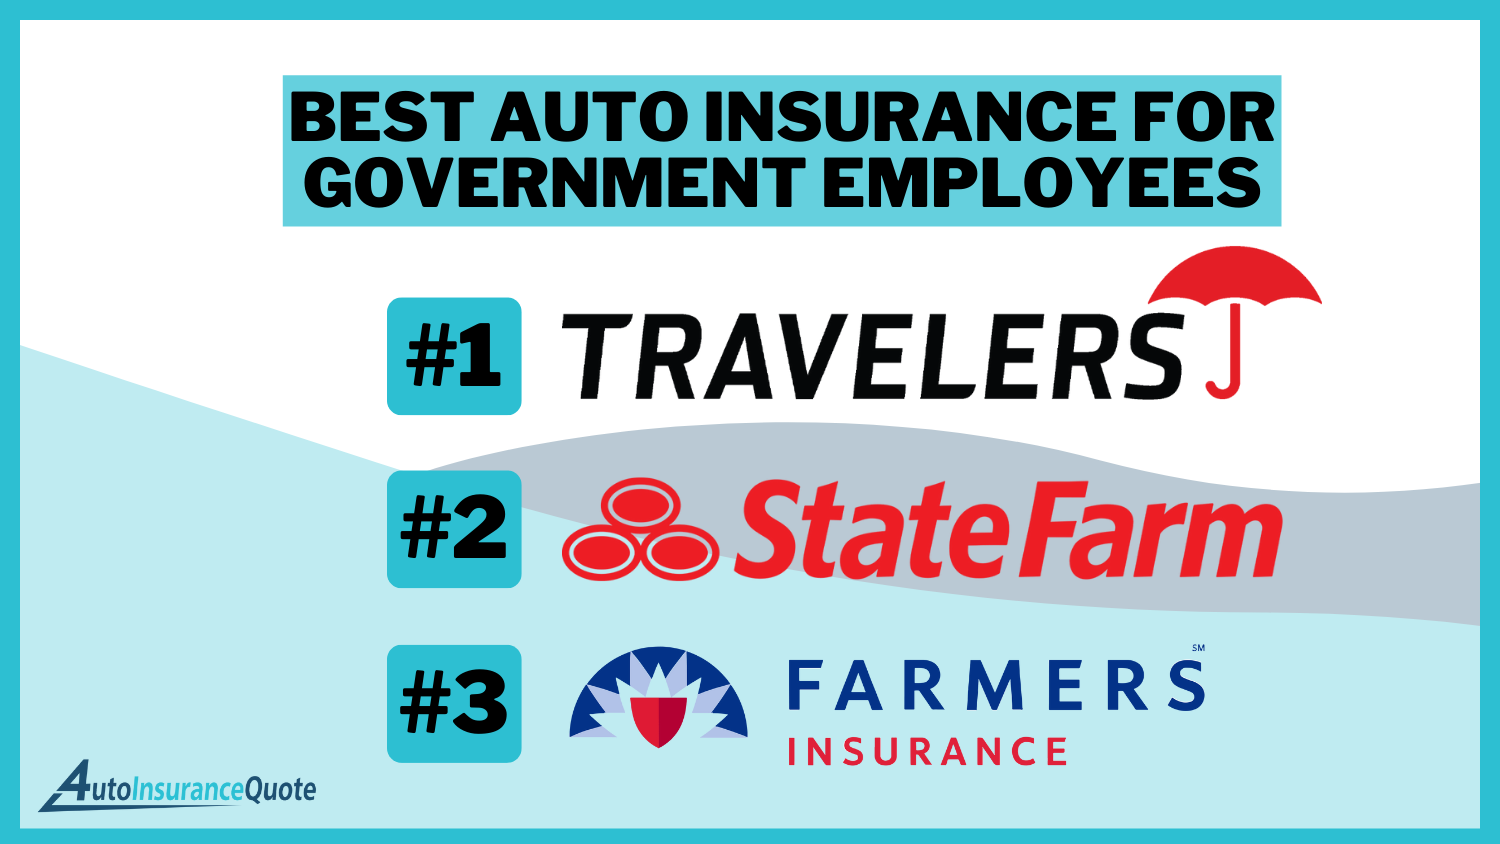 Best Auto Insurance for Government Employees